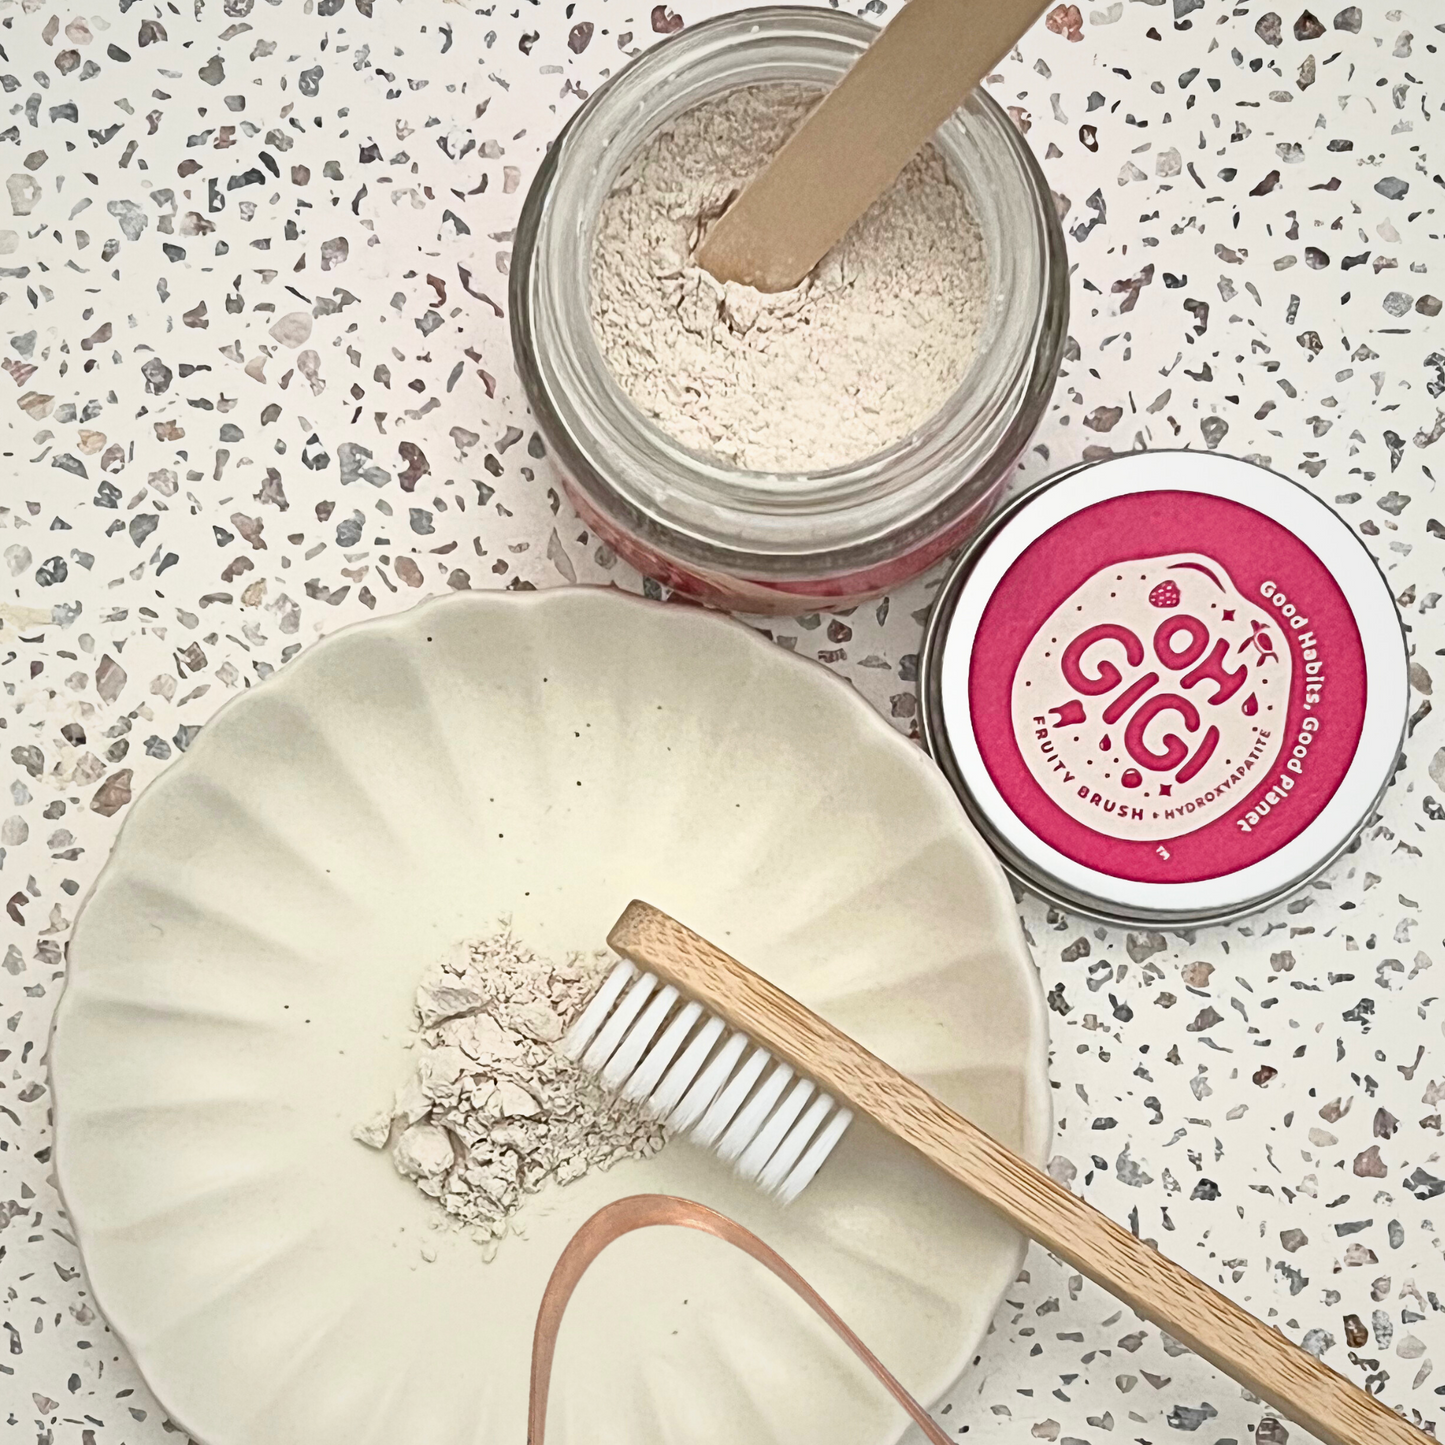 Organic Tooth Powder 'Fruity Brush + Hydroxyapatite' & Pure Copper Tongue Cleaner Oral Detox Kit